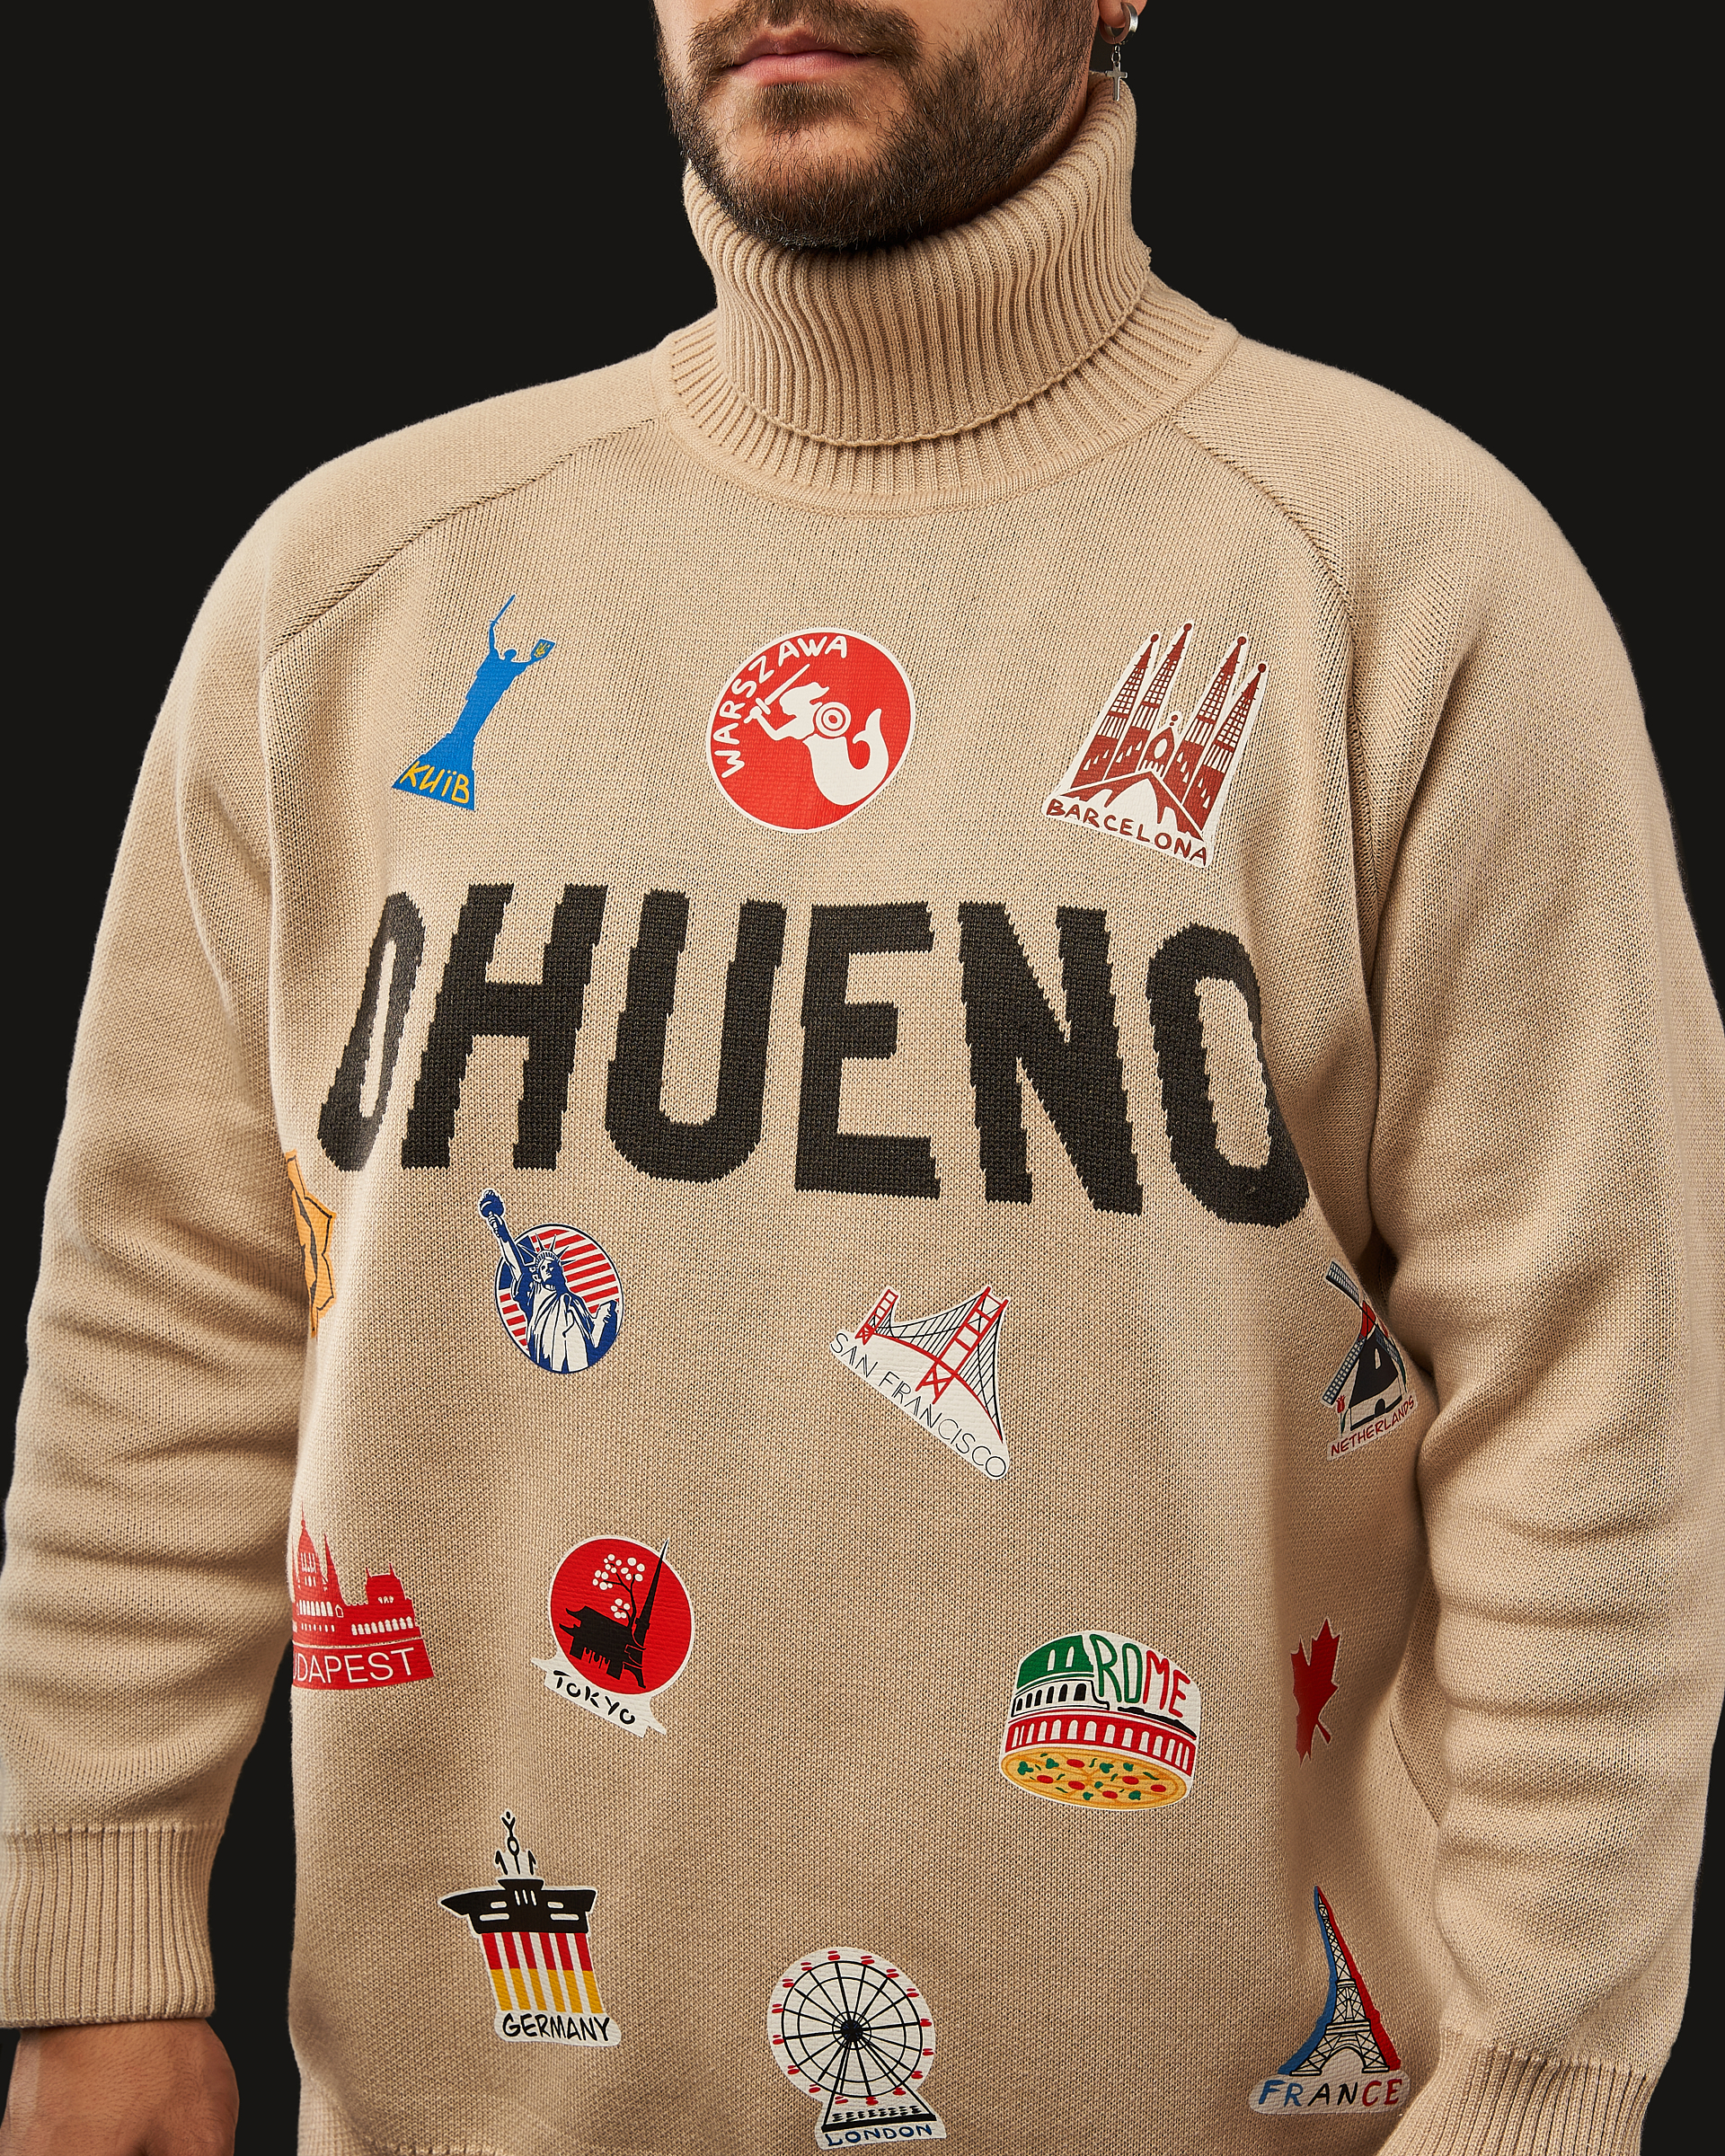 Sweater (beige) Image: https://ohueno-official.com/wp-content/uploads/m01953.jpg